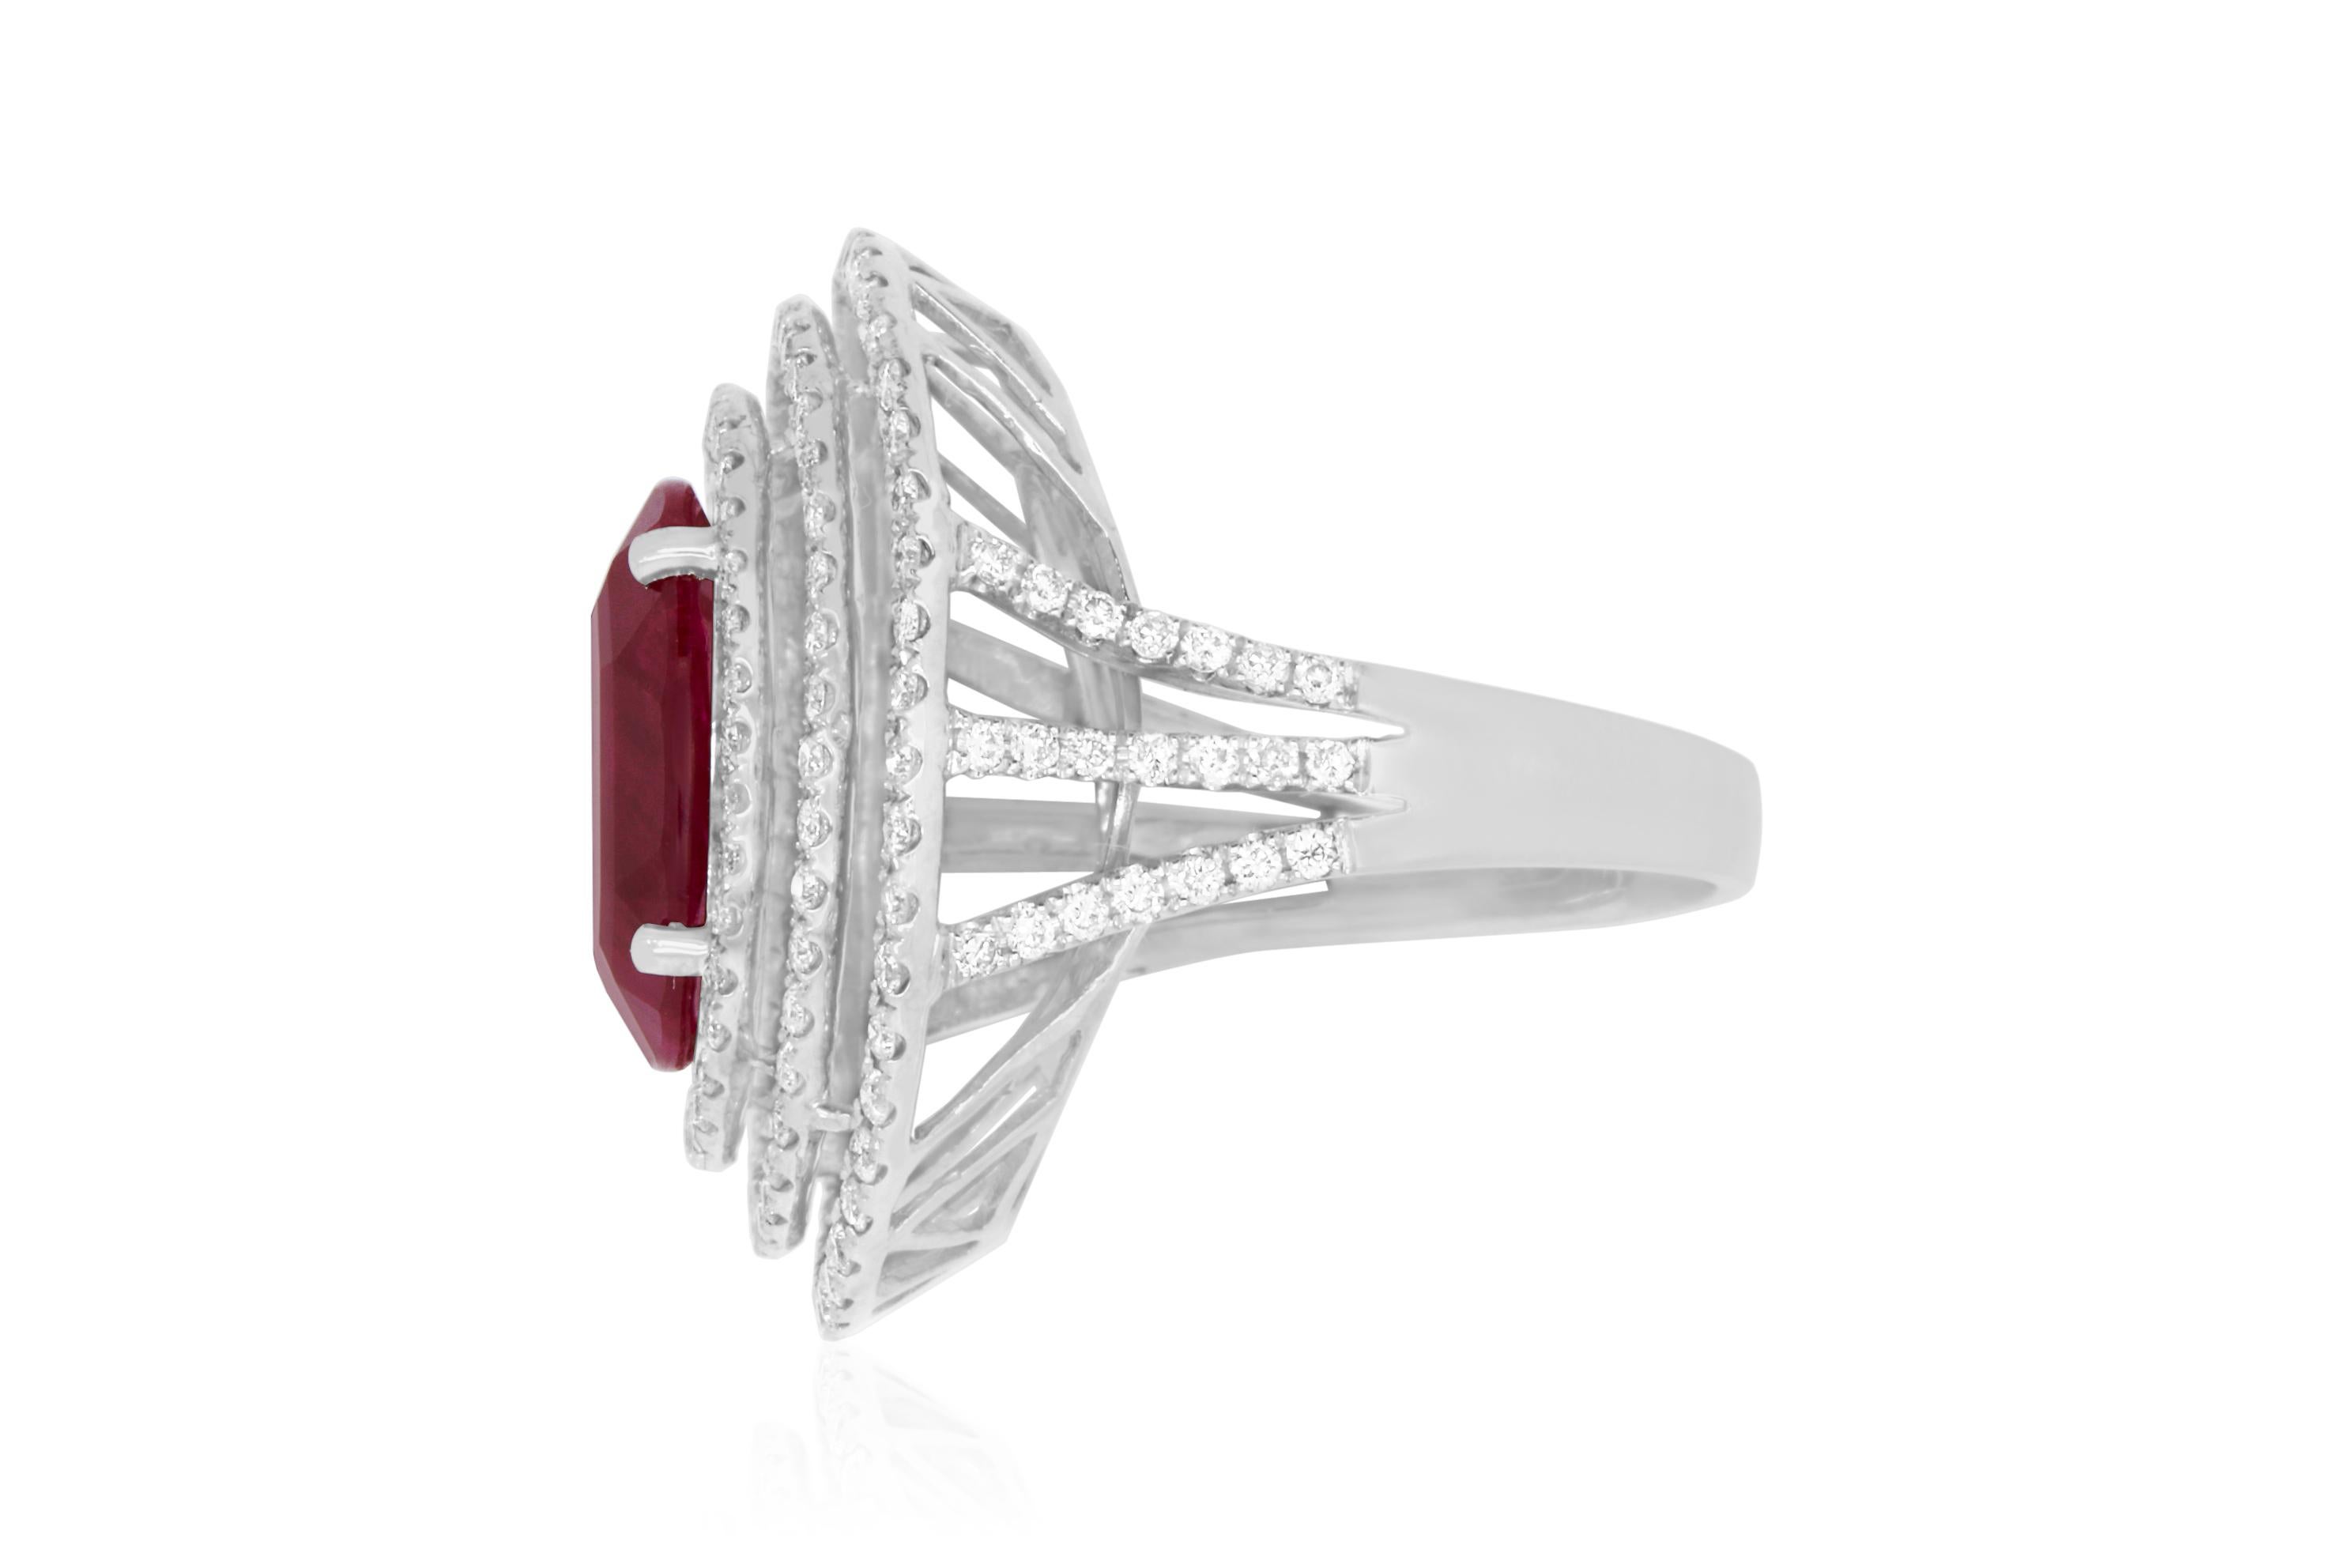 Material: 14k White Gold 
Center Stone Details: 7.06 Carat Oval Ruby
Mounting Diamond Details: Round White Diamonds Approximately 2.25 Carats - Clarity: SI / Color: H-I
Ring Size: Size 6.75. Alberto offers complimentary sizing on all rings.

Match